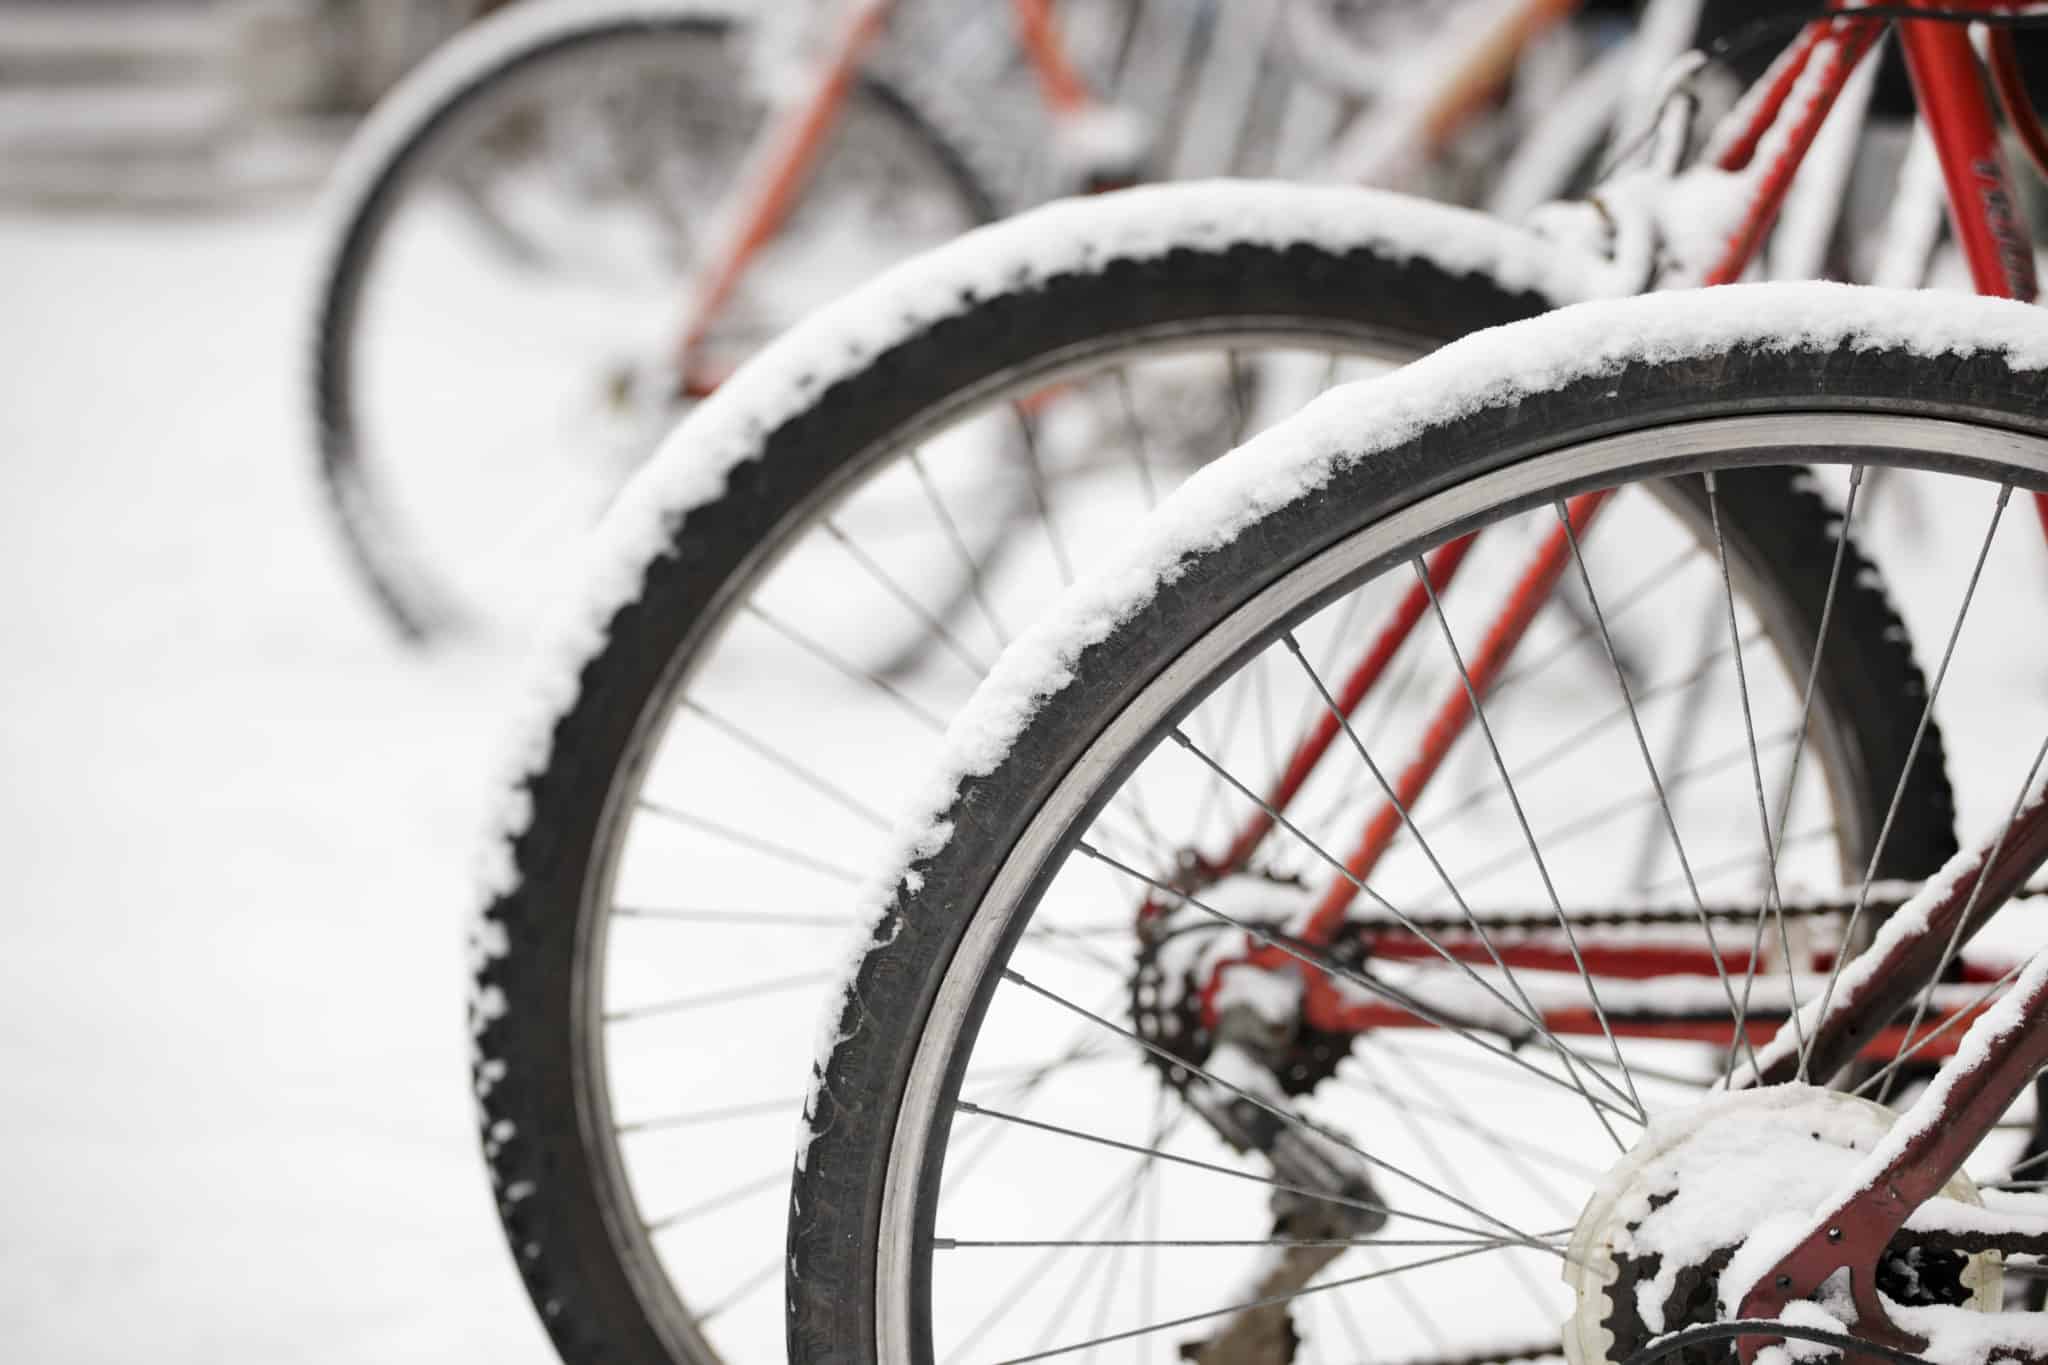 Winter Cycling: Safety Tips for Cycling in A Winter Wonderland